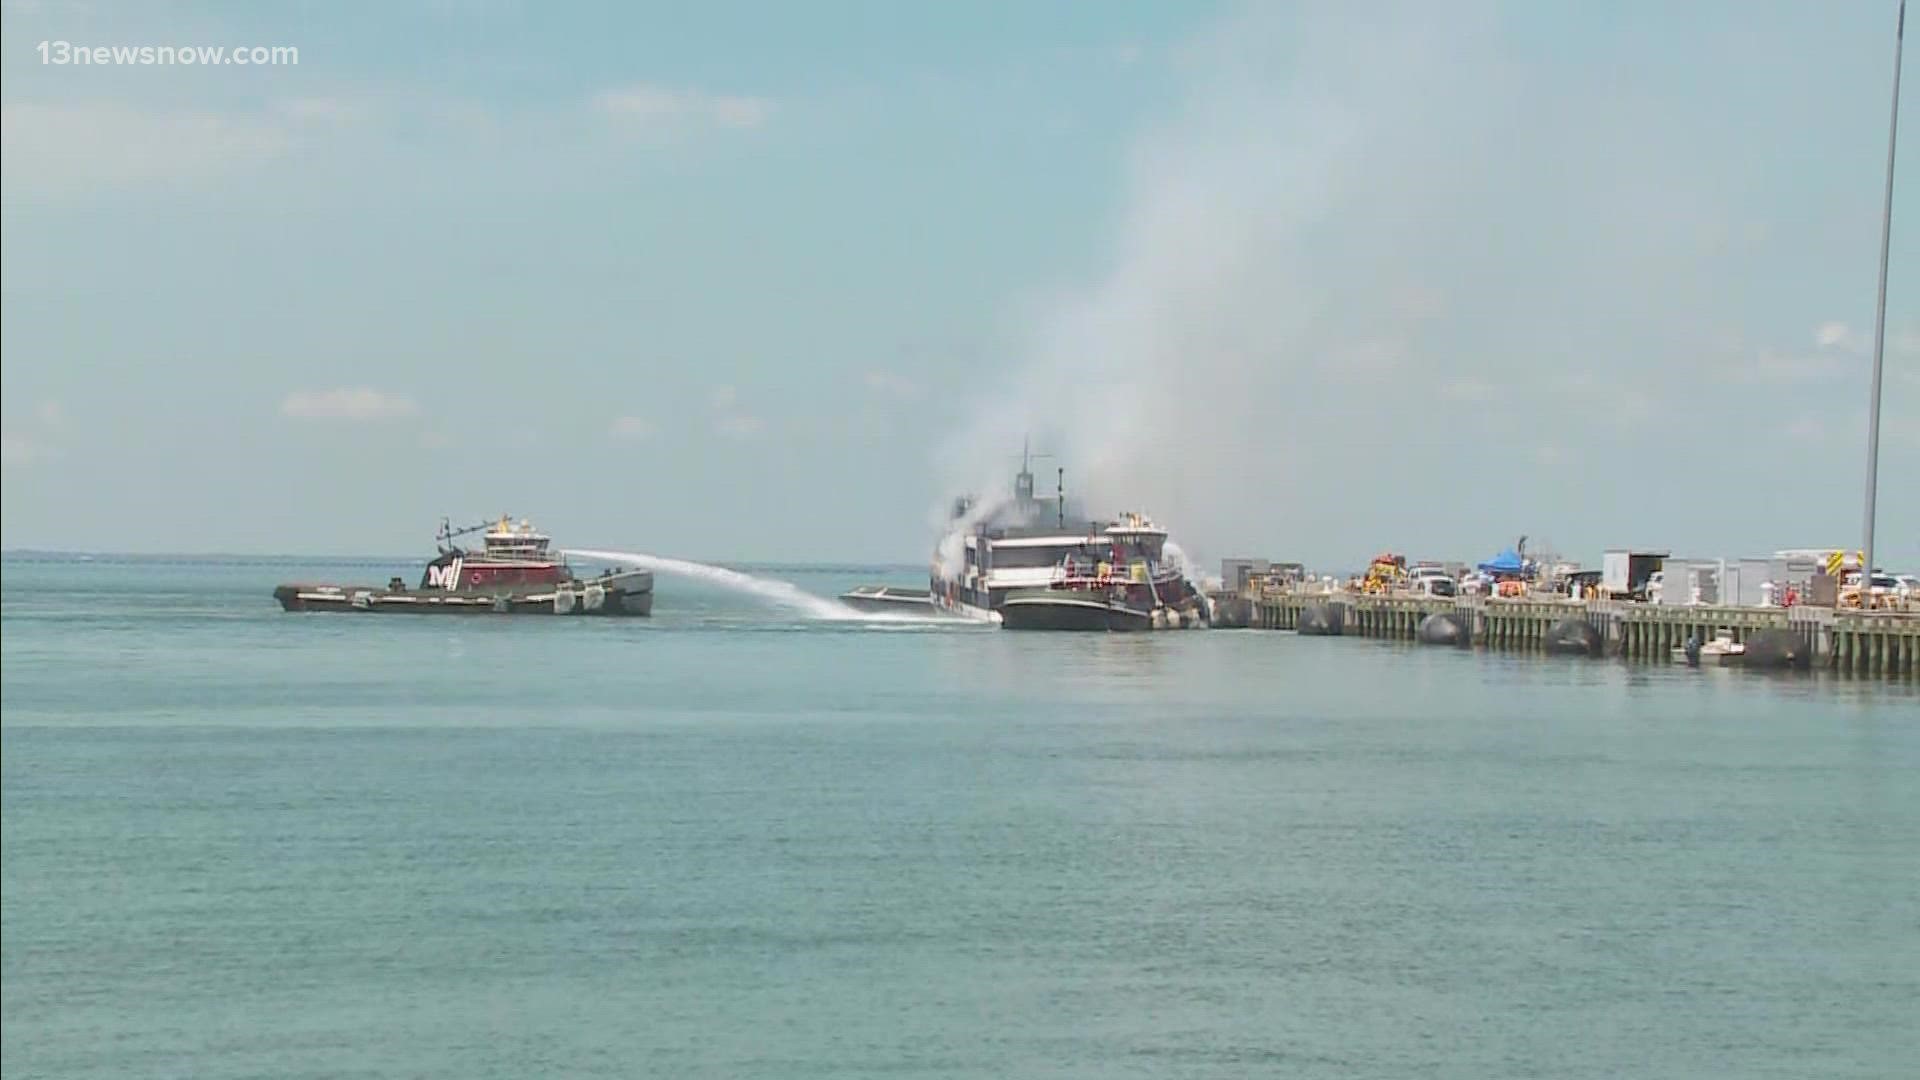 The yacht caught on fire on June 7 during a kindergarten graduation celebration. Fortunately, everyone was able to escape safely.